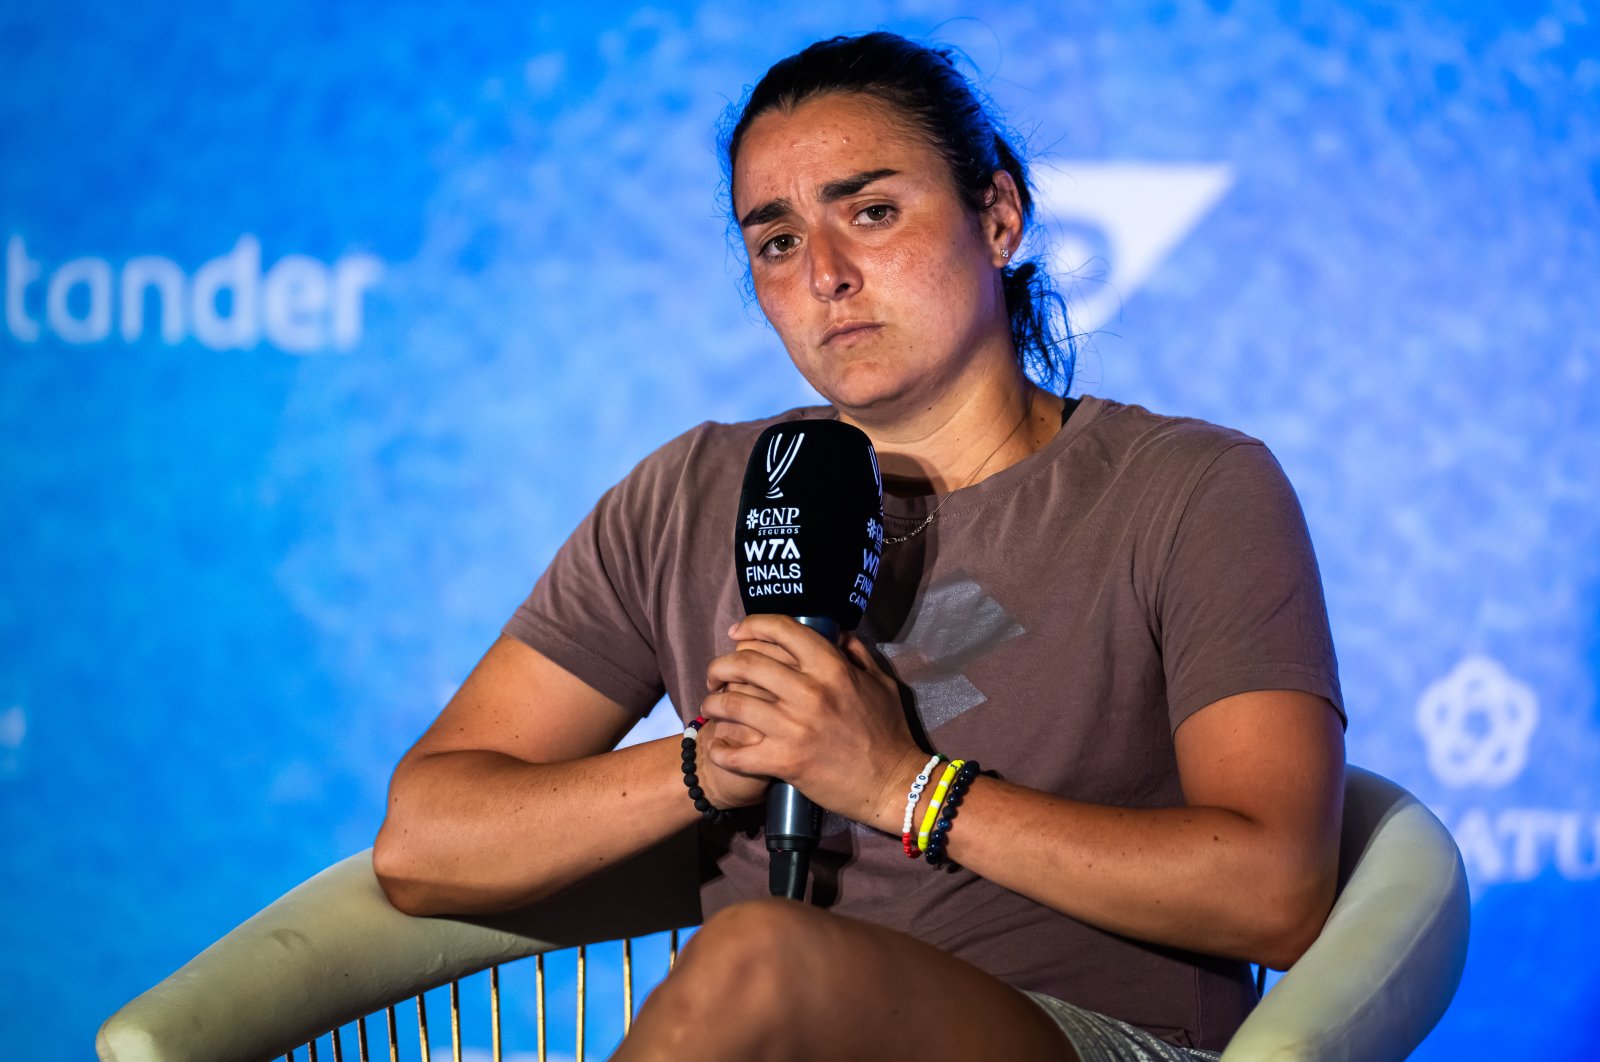 Tunisia&#039;s Ons Jabeur talks to the media after defeating Czechia&#039;s Marketa Vondrousova in the second round robin match on Day 4 of the GNP Seguros WTA Finals Cancun 2023 part of the Hologic WTA Tour, Cancun, Mexico, Nov. 1, 2023 (Getty Images Photo)